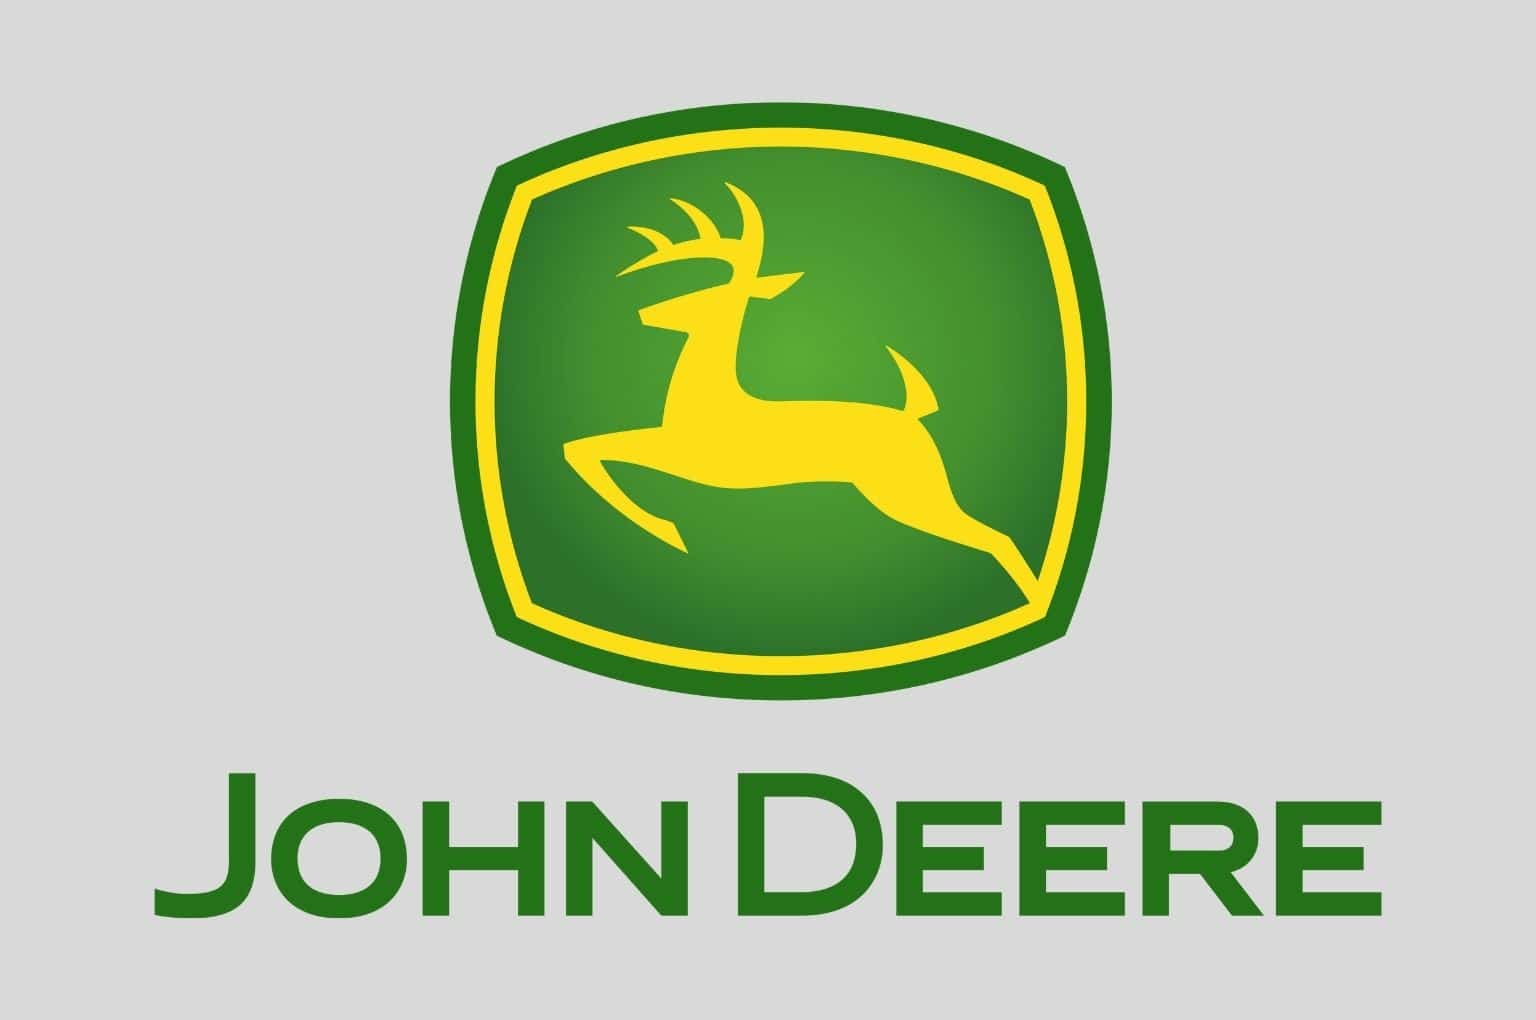 Deere Q4 and full fiscal year 2022 results